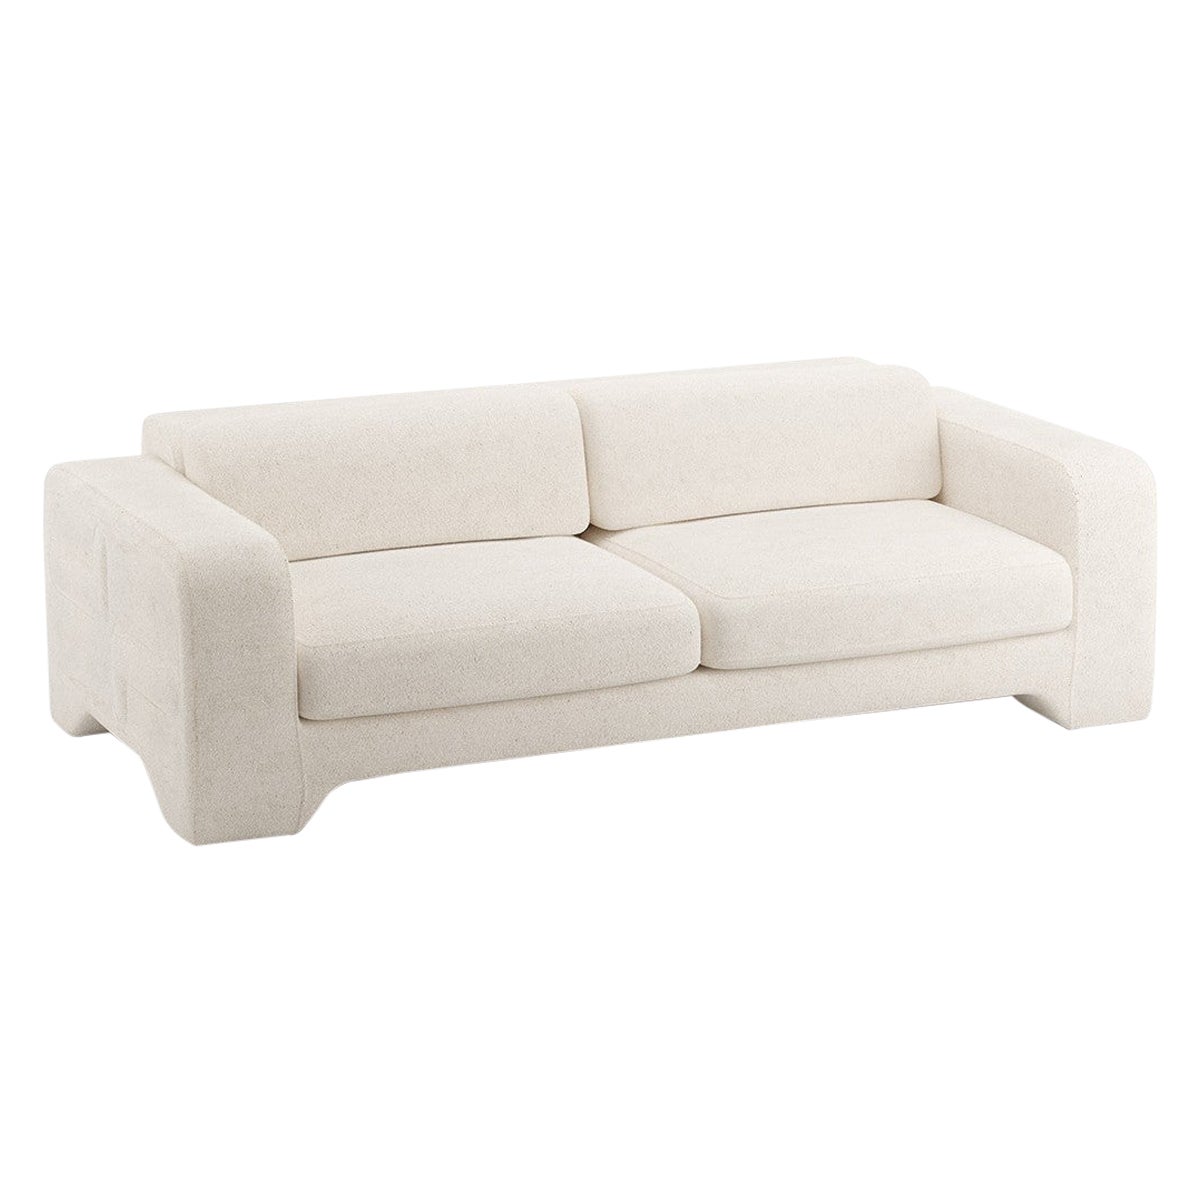 Popus Editions Giovanna 2.5 Seater Sofa in EggShell OffWhite Malmoe Terry Fabric For Sale